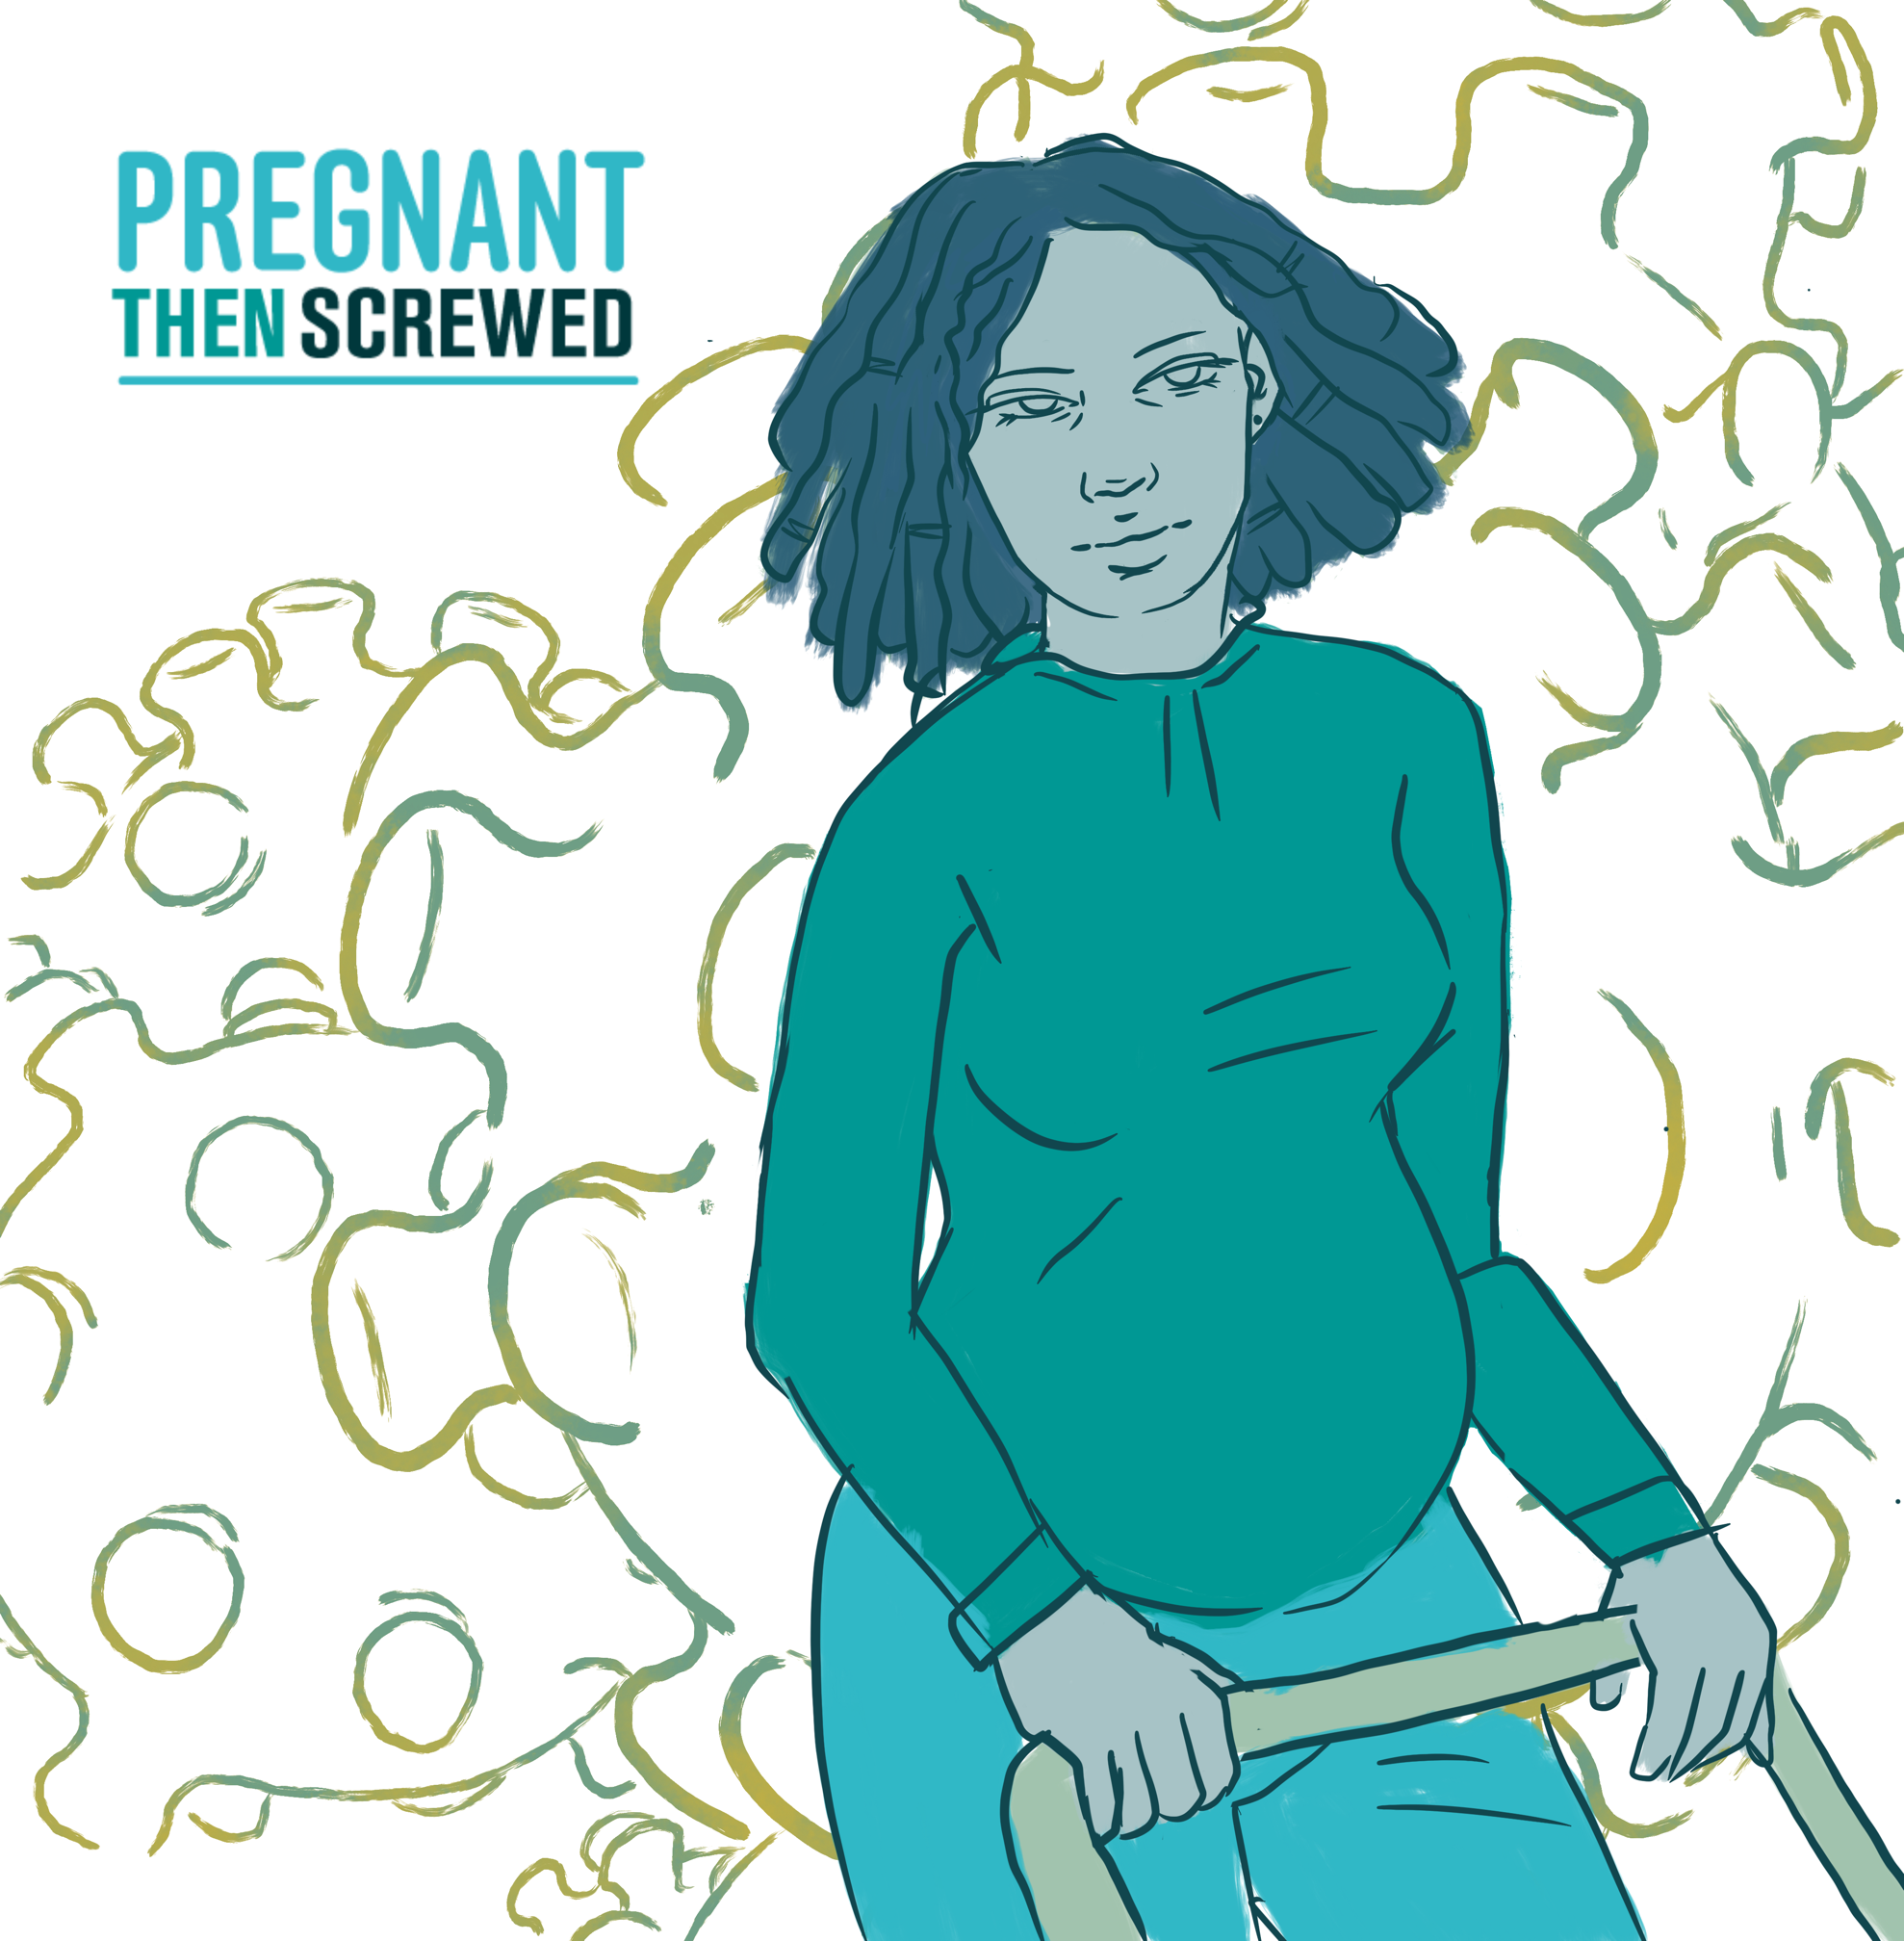 Alt text: Illustration of pregnant woman pushing a buggy surrounded by germs